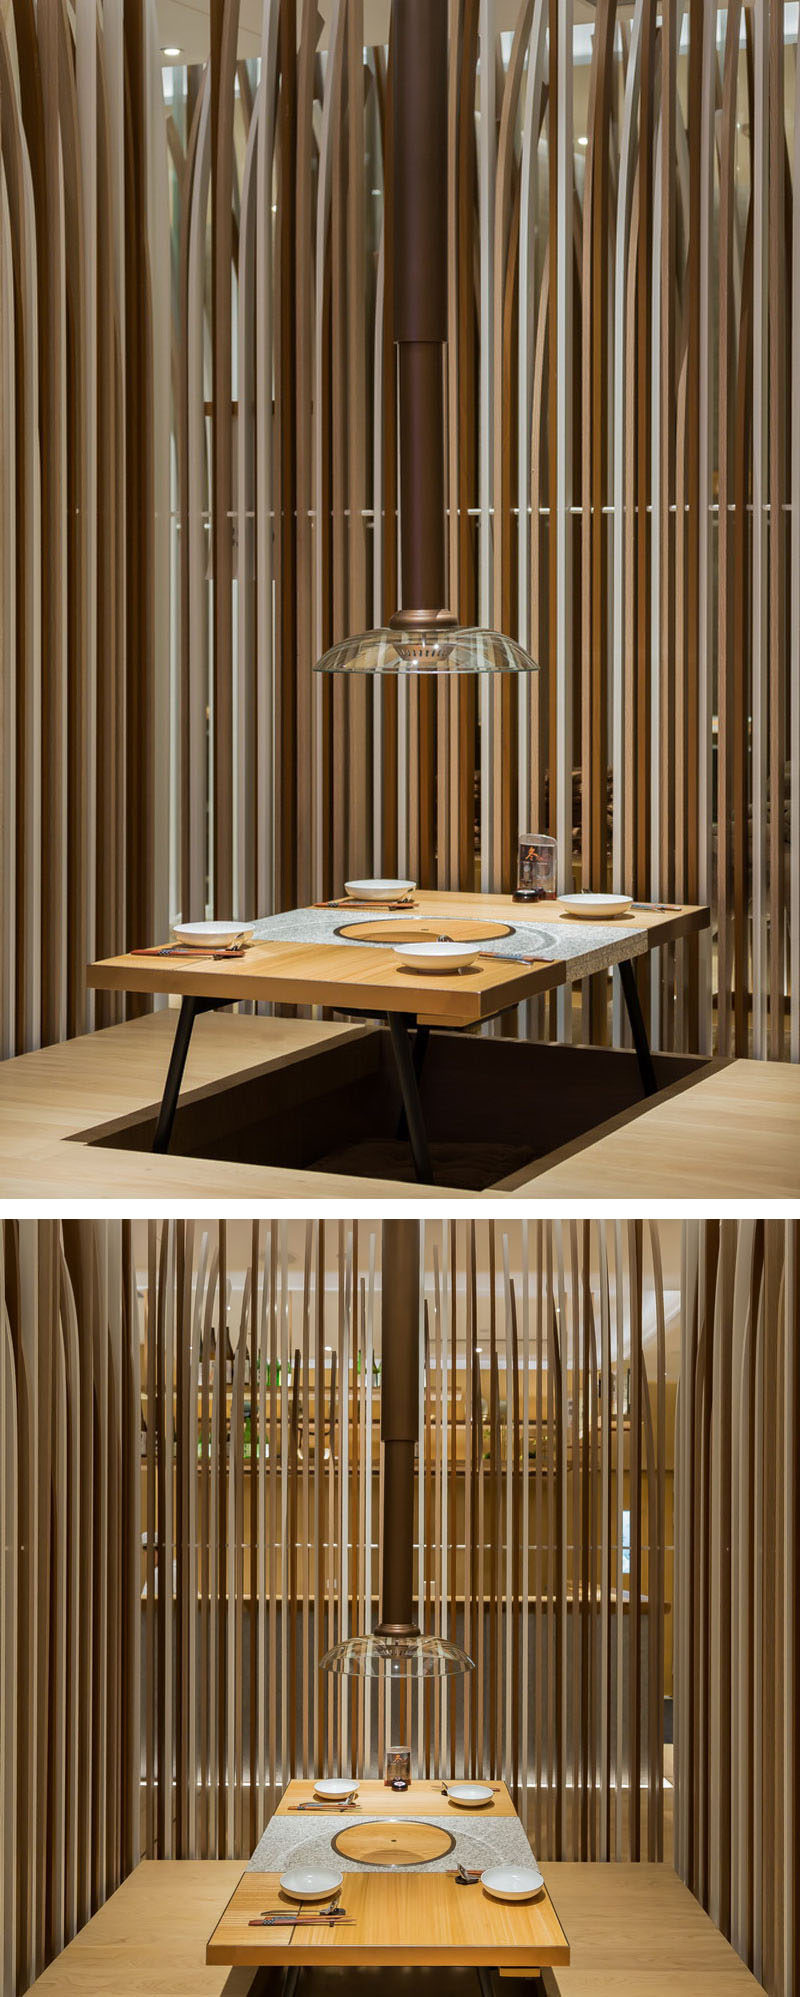 Restaurant Interior Design Ideas - In this hotpot restaurant, some of the tables allow you to sit slightly raised up from the floor with your legs tucked in underneath the tatami style table.